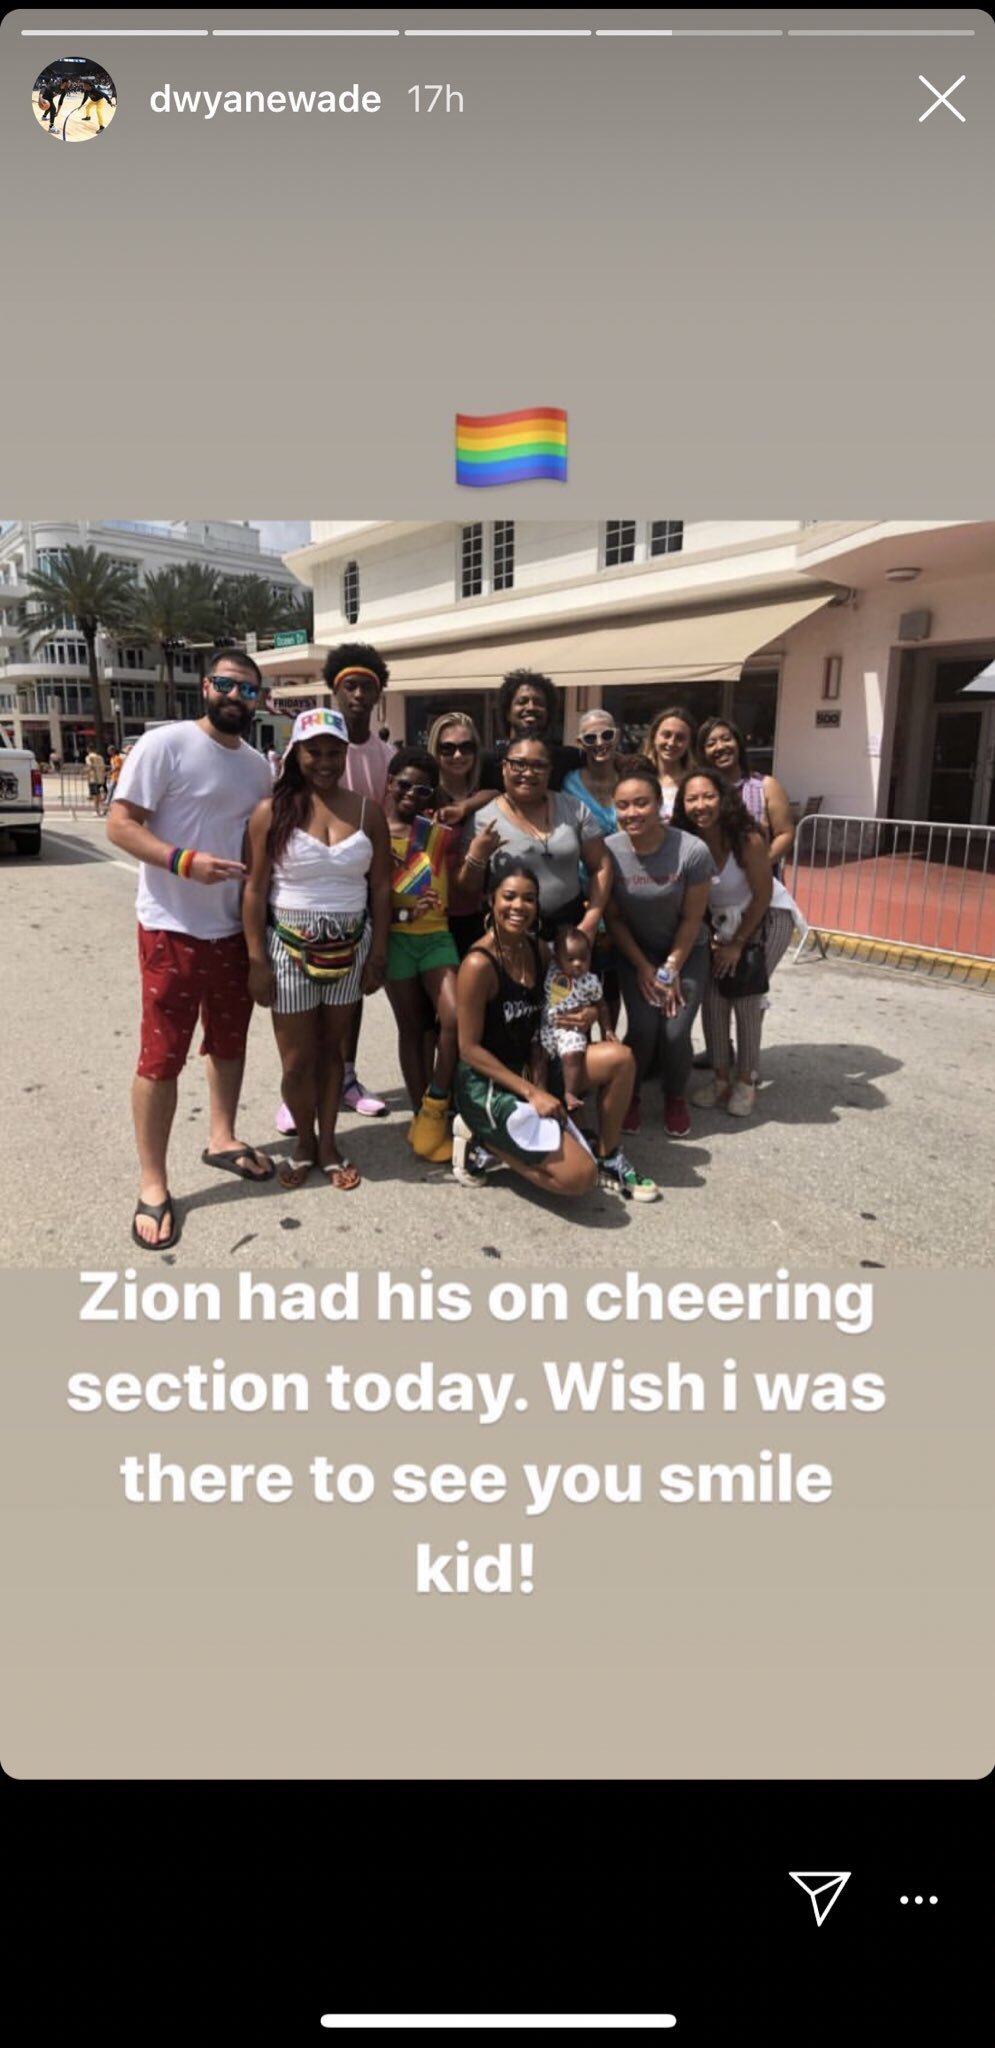 Zion Wade and his family & friends. | Source: Screenshot from Instagram story/dwyanewade